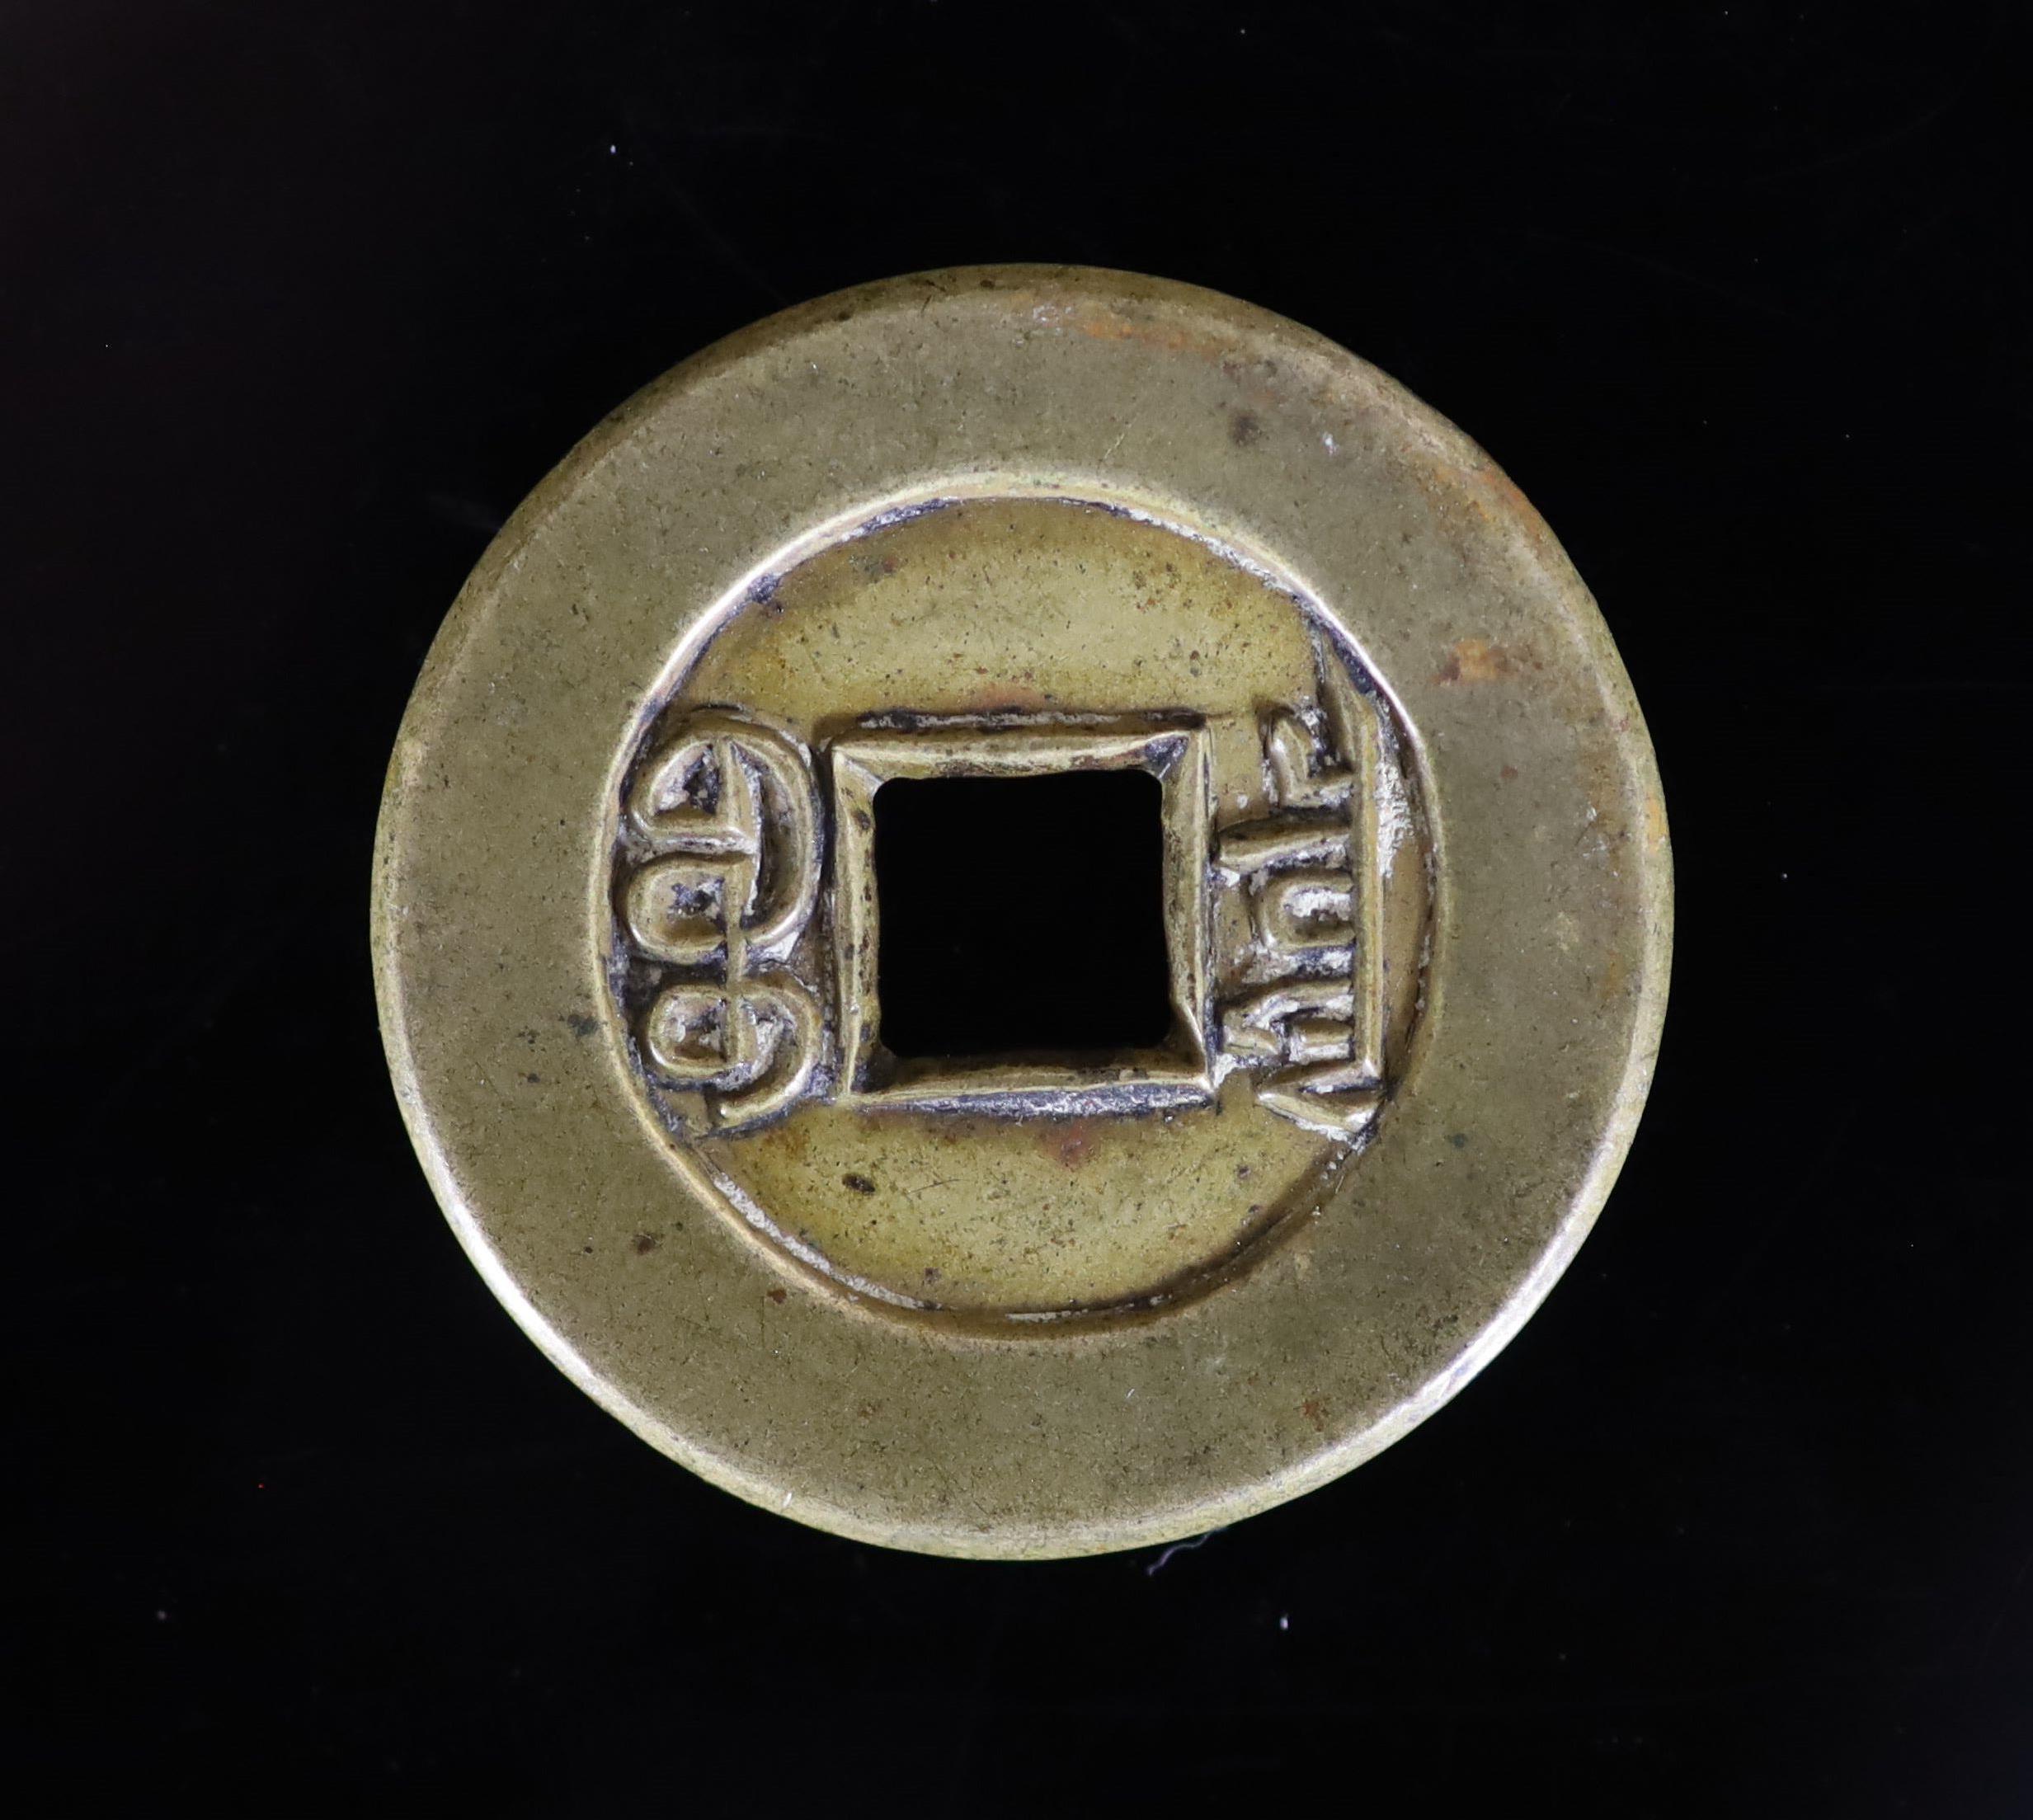 China Empire, coins - a rare Guangxu tongbao 1 cash mother coin for the Board of Revenue, relating to Hartill CCC 22.1276, 25mm, 5.6g